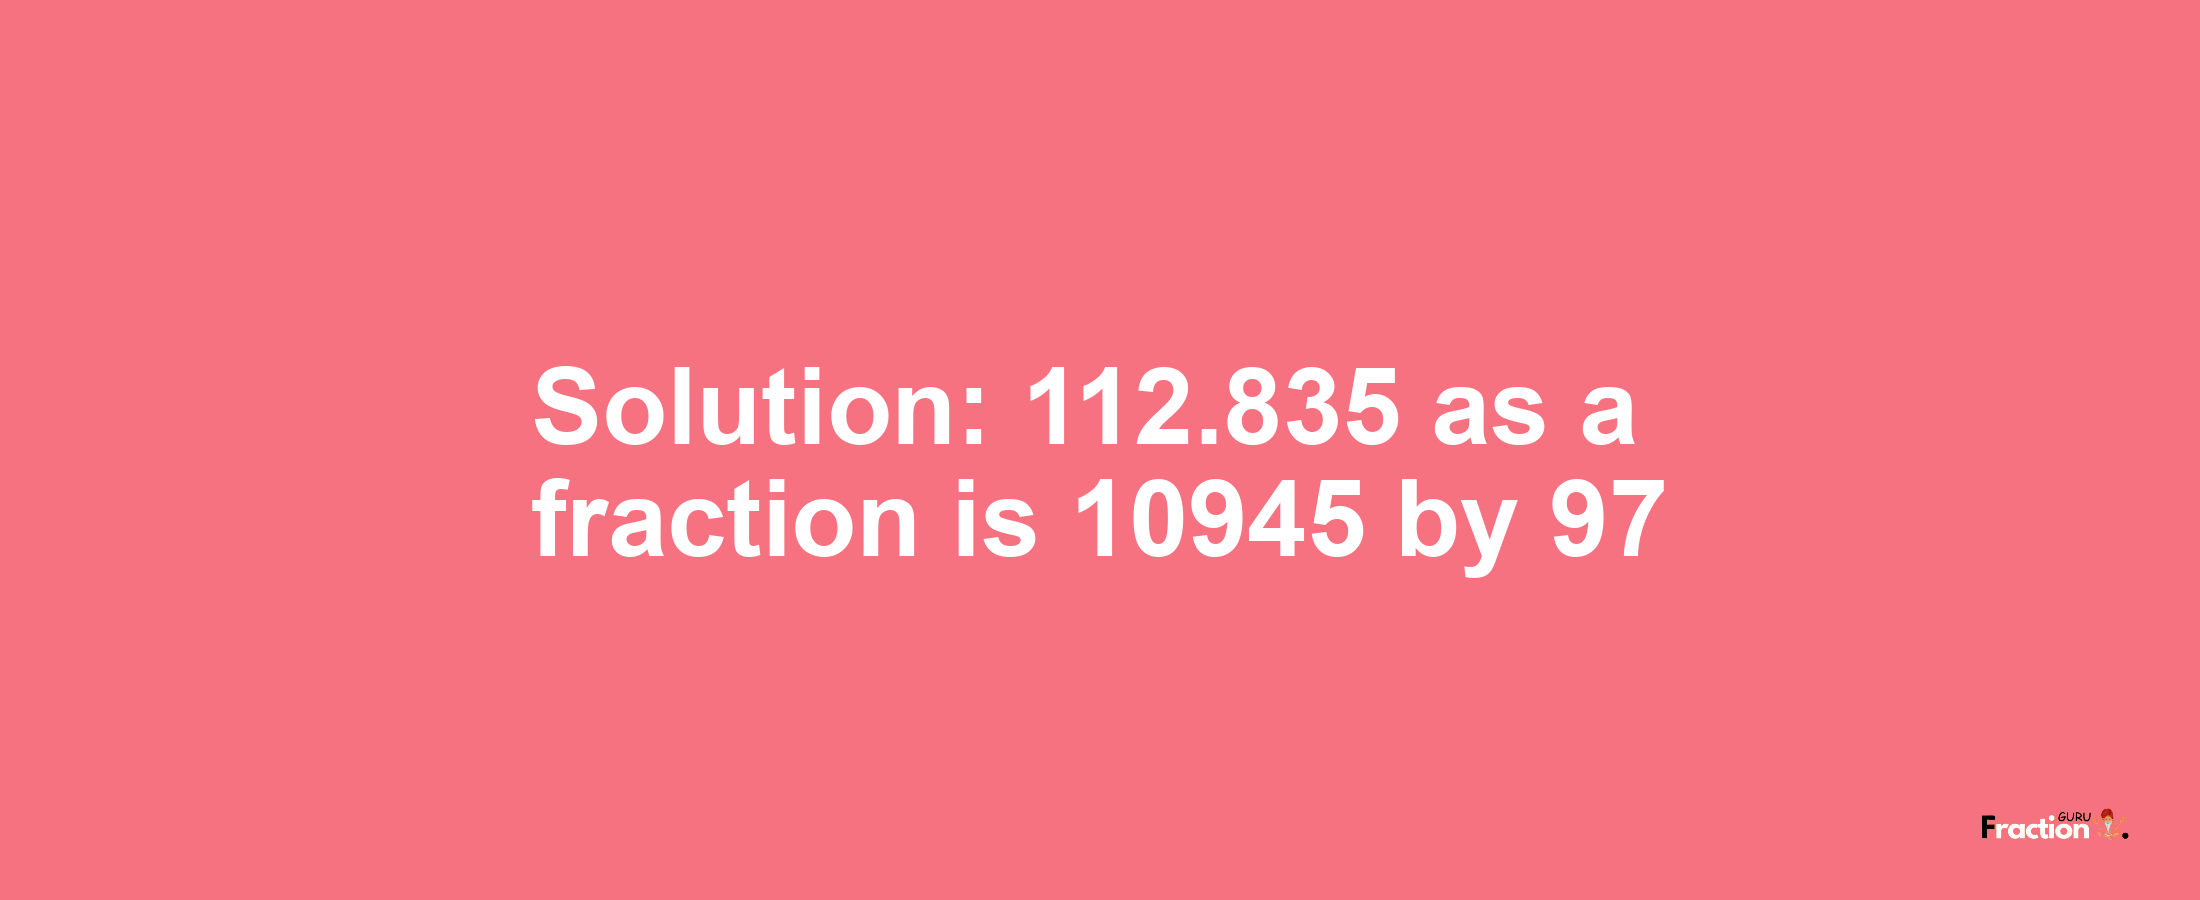 Solution:112.835 as a fraction is 10945/97